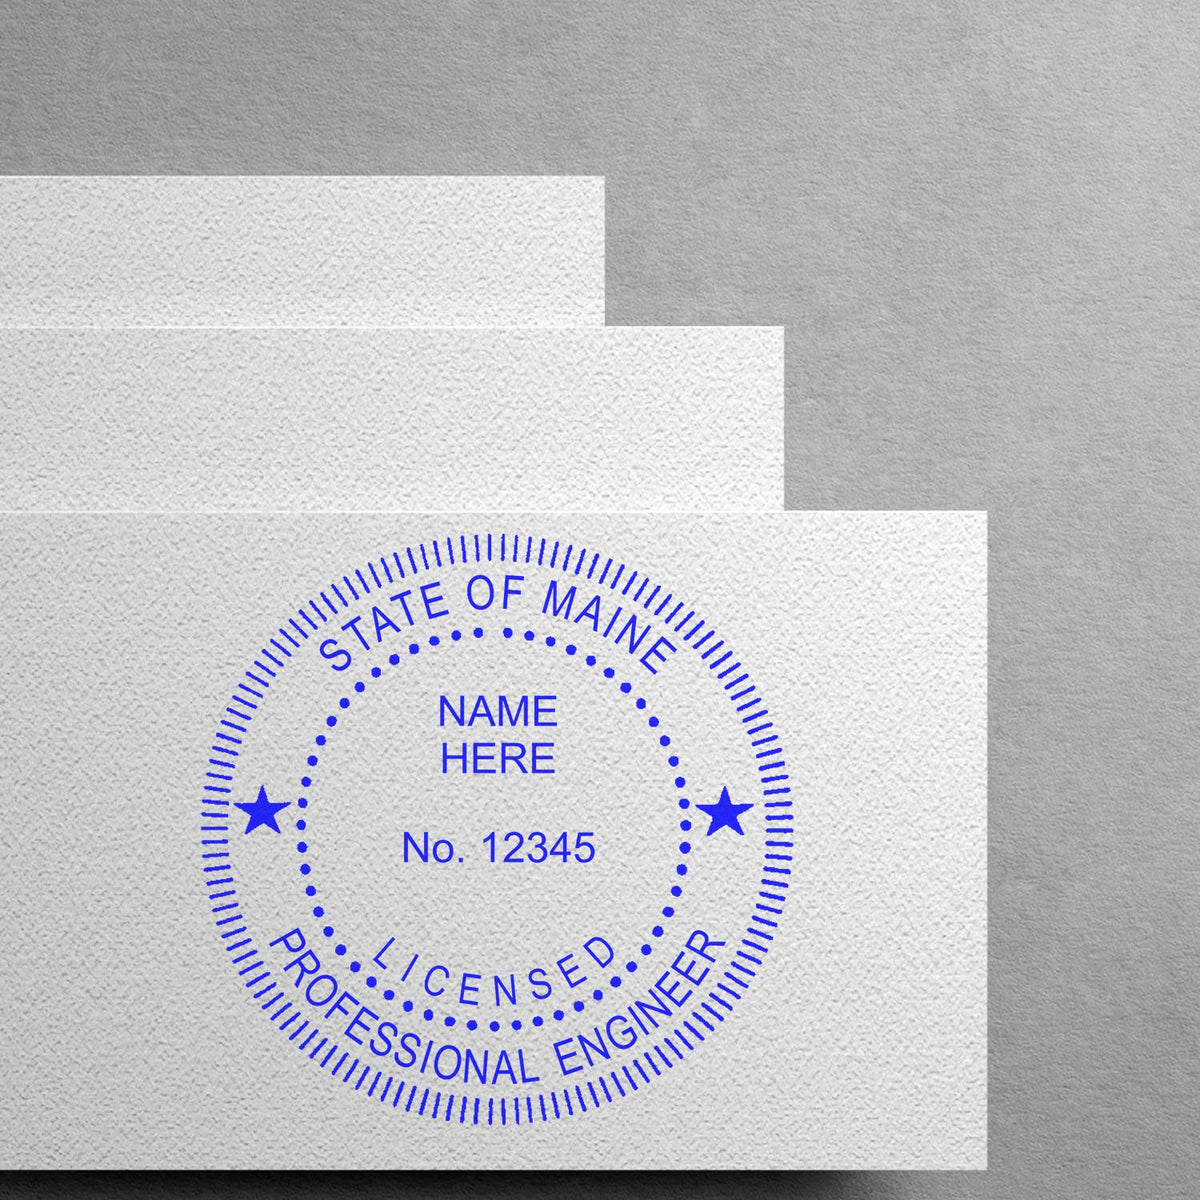 The Digital Maine PE Stamp and Electronic Seal for Maine Engineer stamp impression comes to life with a crisp, detailed photo on paper - showcasing true professional quality.